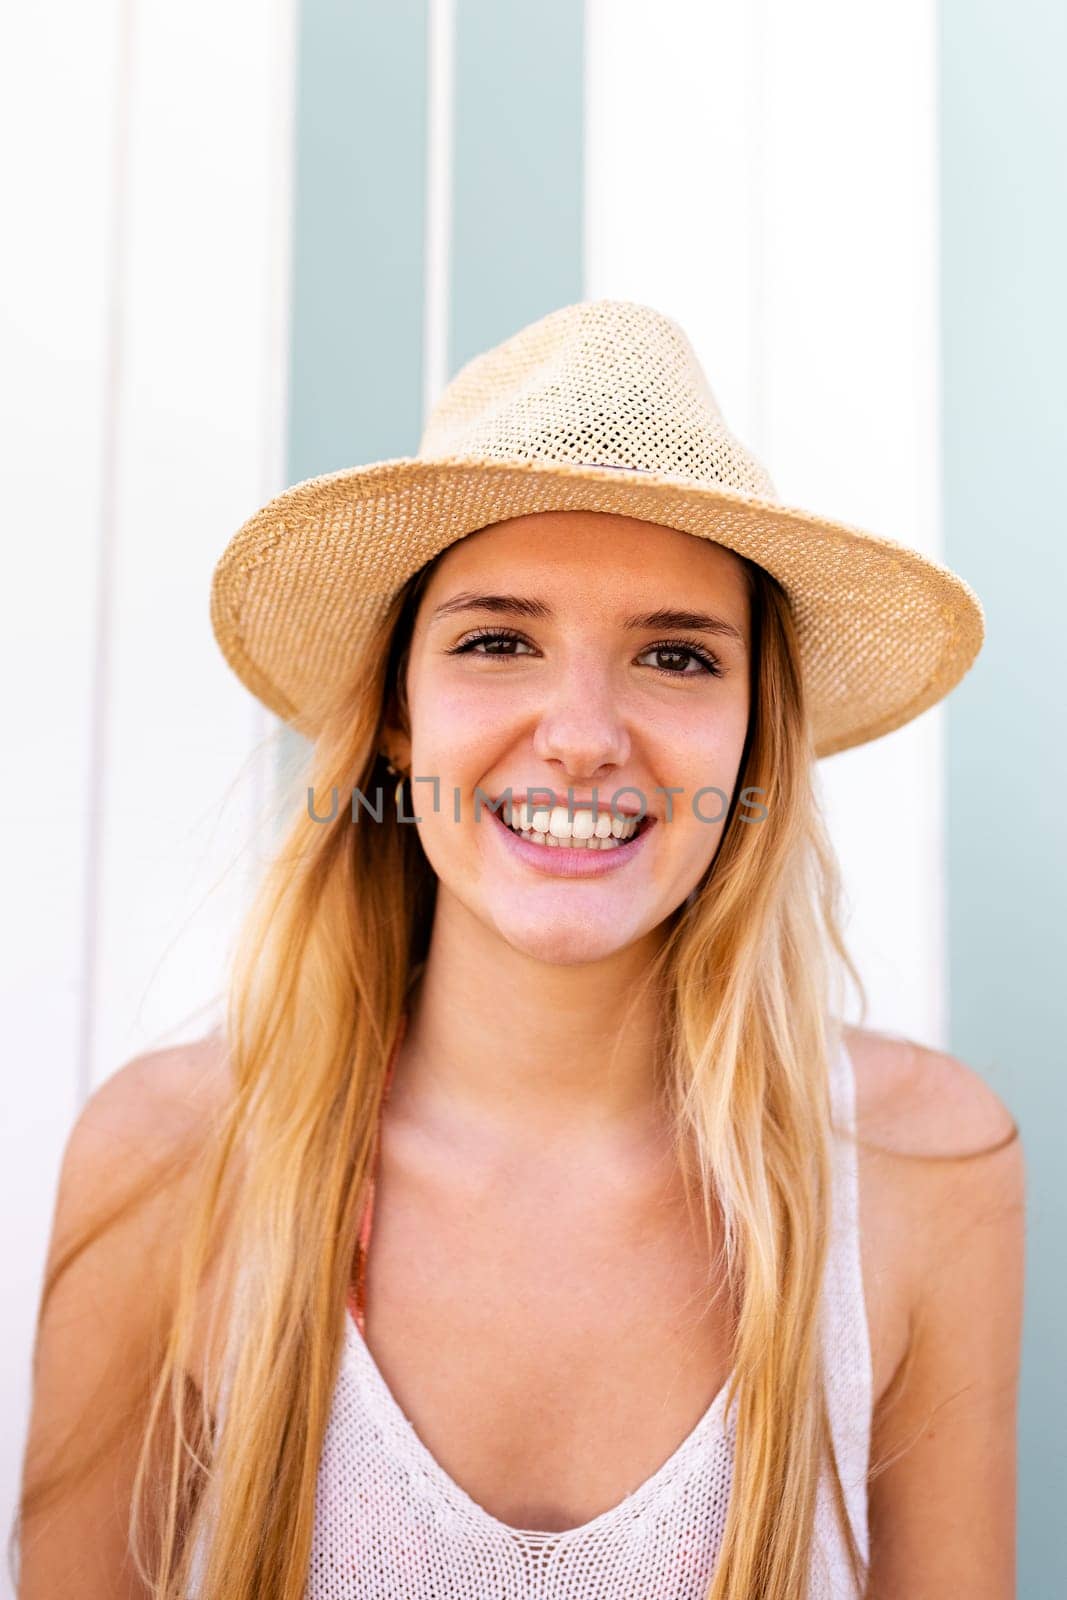 Headshot of young happy blond woman on vacation wearing hat looking at camera. by Hoverstock